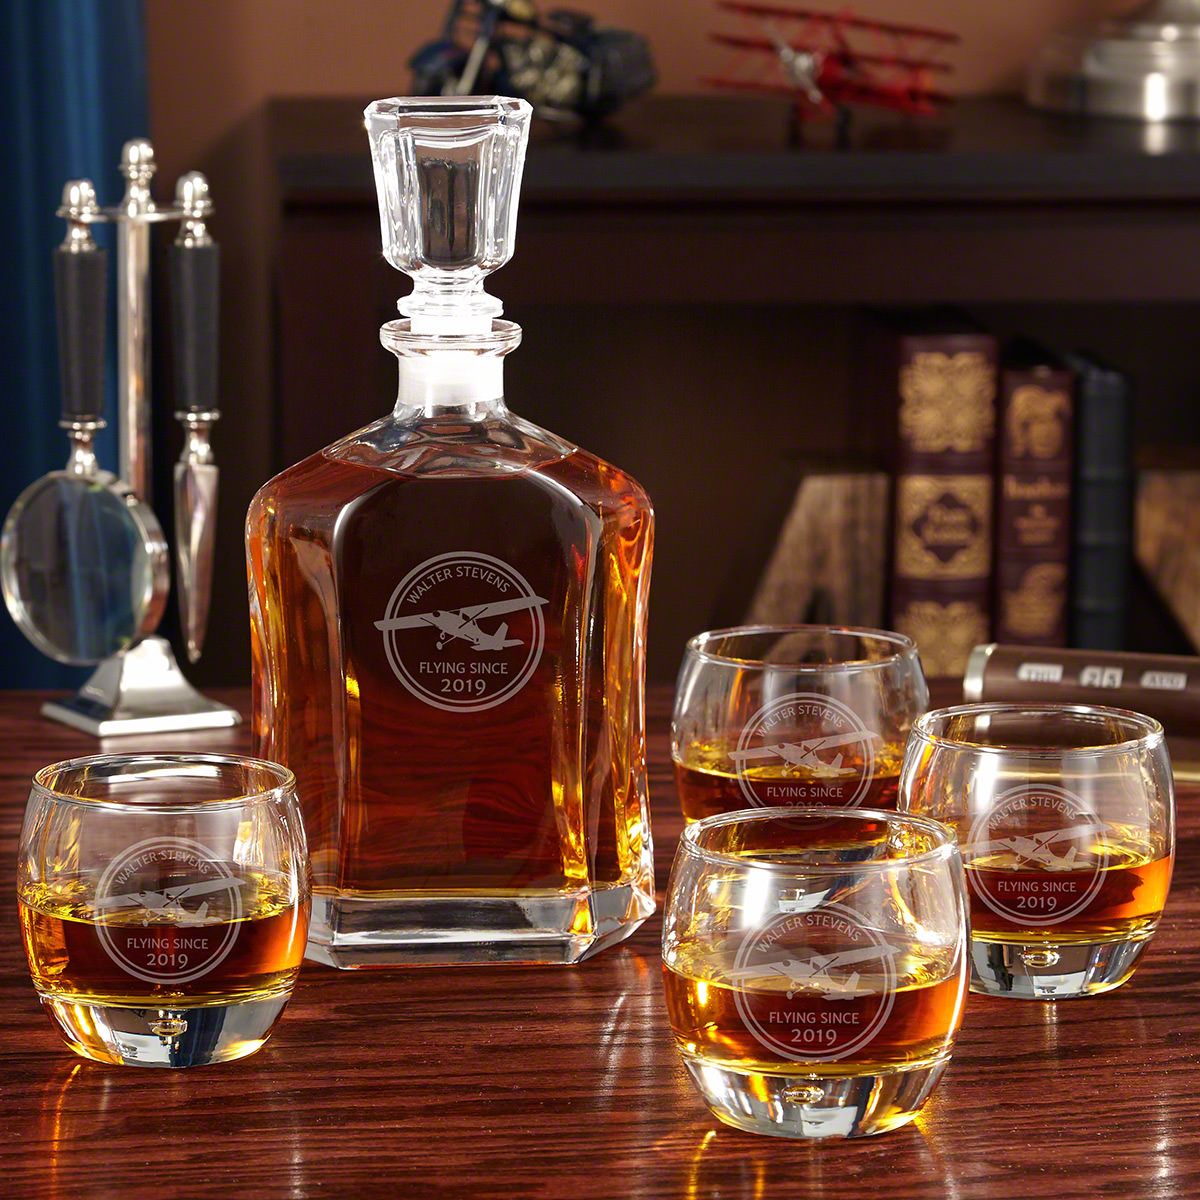 Aviator Engraved Argos Decanter Set With Uptown Glasses